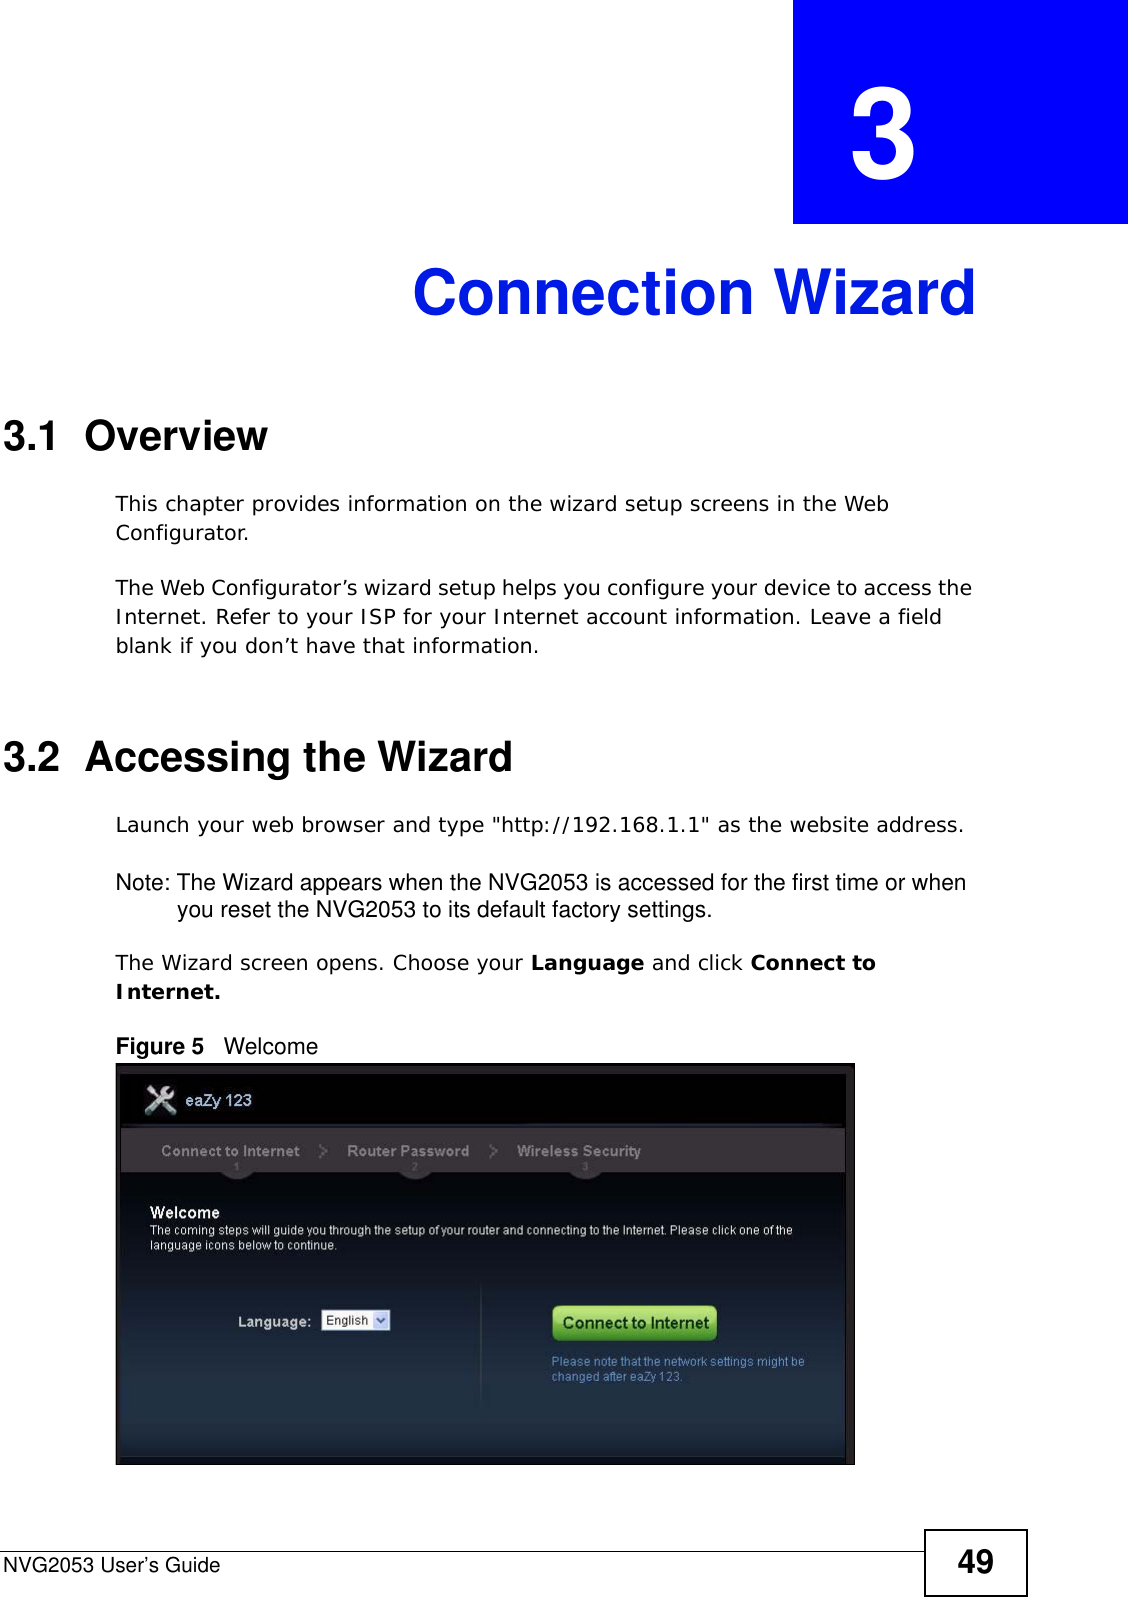 NVG2053 User’s Guide 49CHAPTER  3 Connection Wizard3.1  OverviewThis chapter provides information on the wizard setup screens in the Web Configurator.The Web Configurator’s wizard setup helps you configure your device to access the Internet. Refer to your ISP for your Internet account information. Leave a field blank if you don’t have that information.3.2  Accessing the WizardLaunch your web browser and type &quot;http://192.168.1.1&quot; as the website address. Note: The Wizard appears when the NVG2053 is accessed for the first time or when you reset the NVG2053 to its default factory settings. The Wizard screen opens. Choose your Language and click Connect to Internet.Figure 5   Welcome 